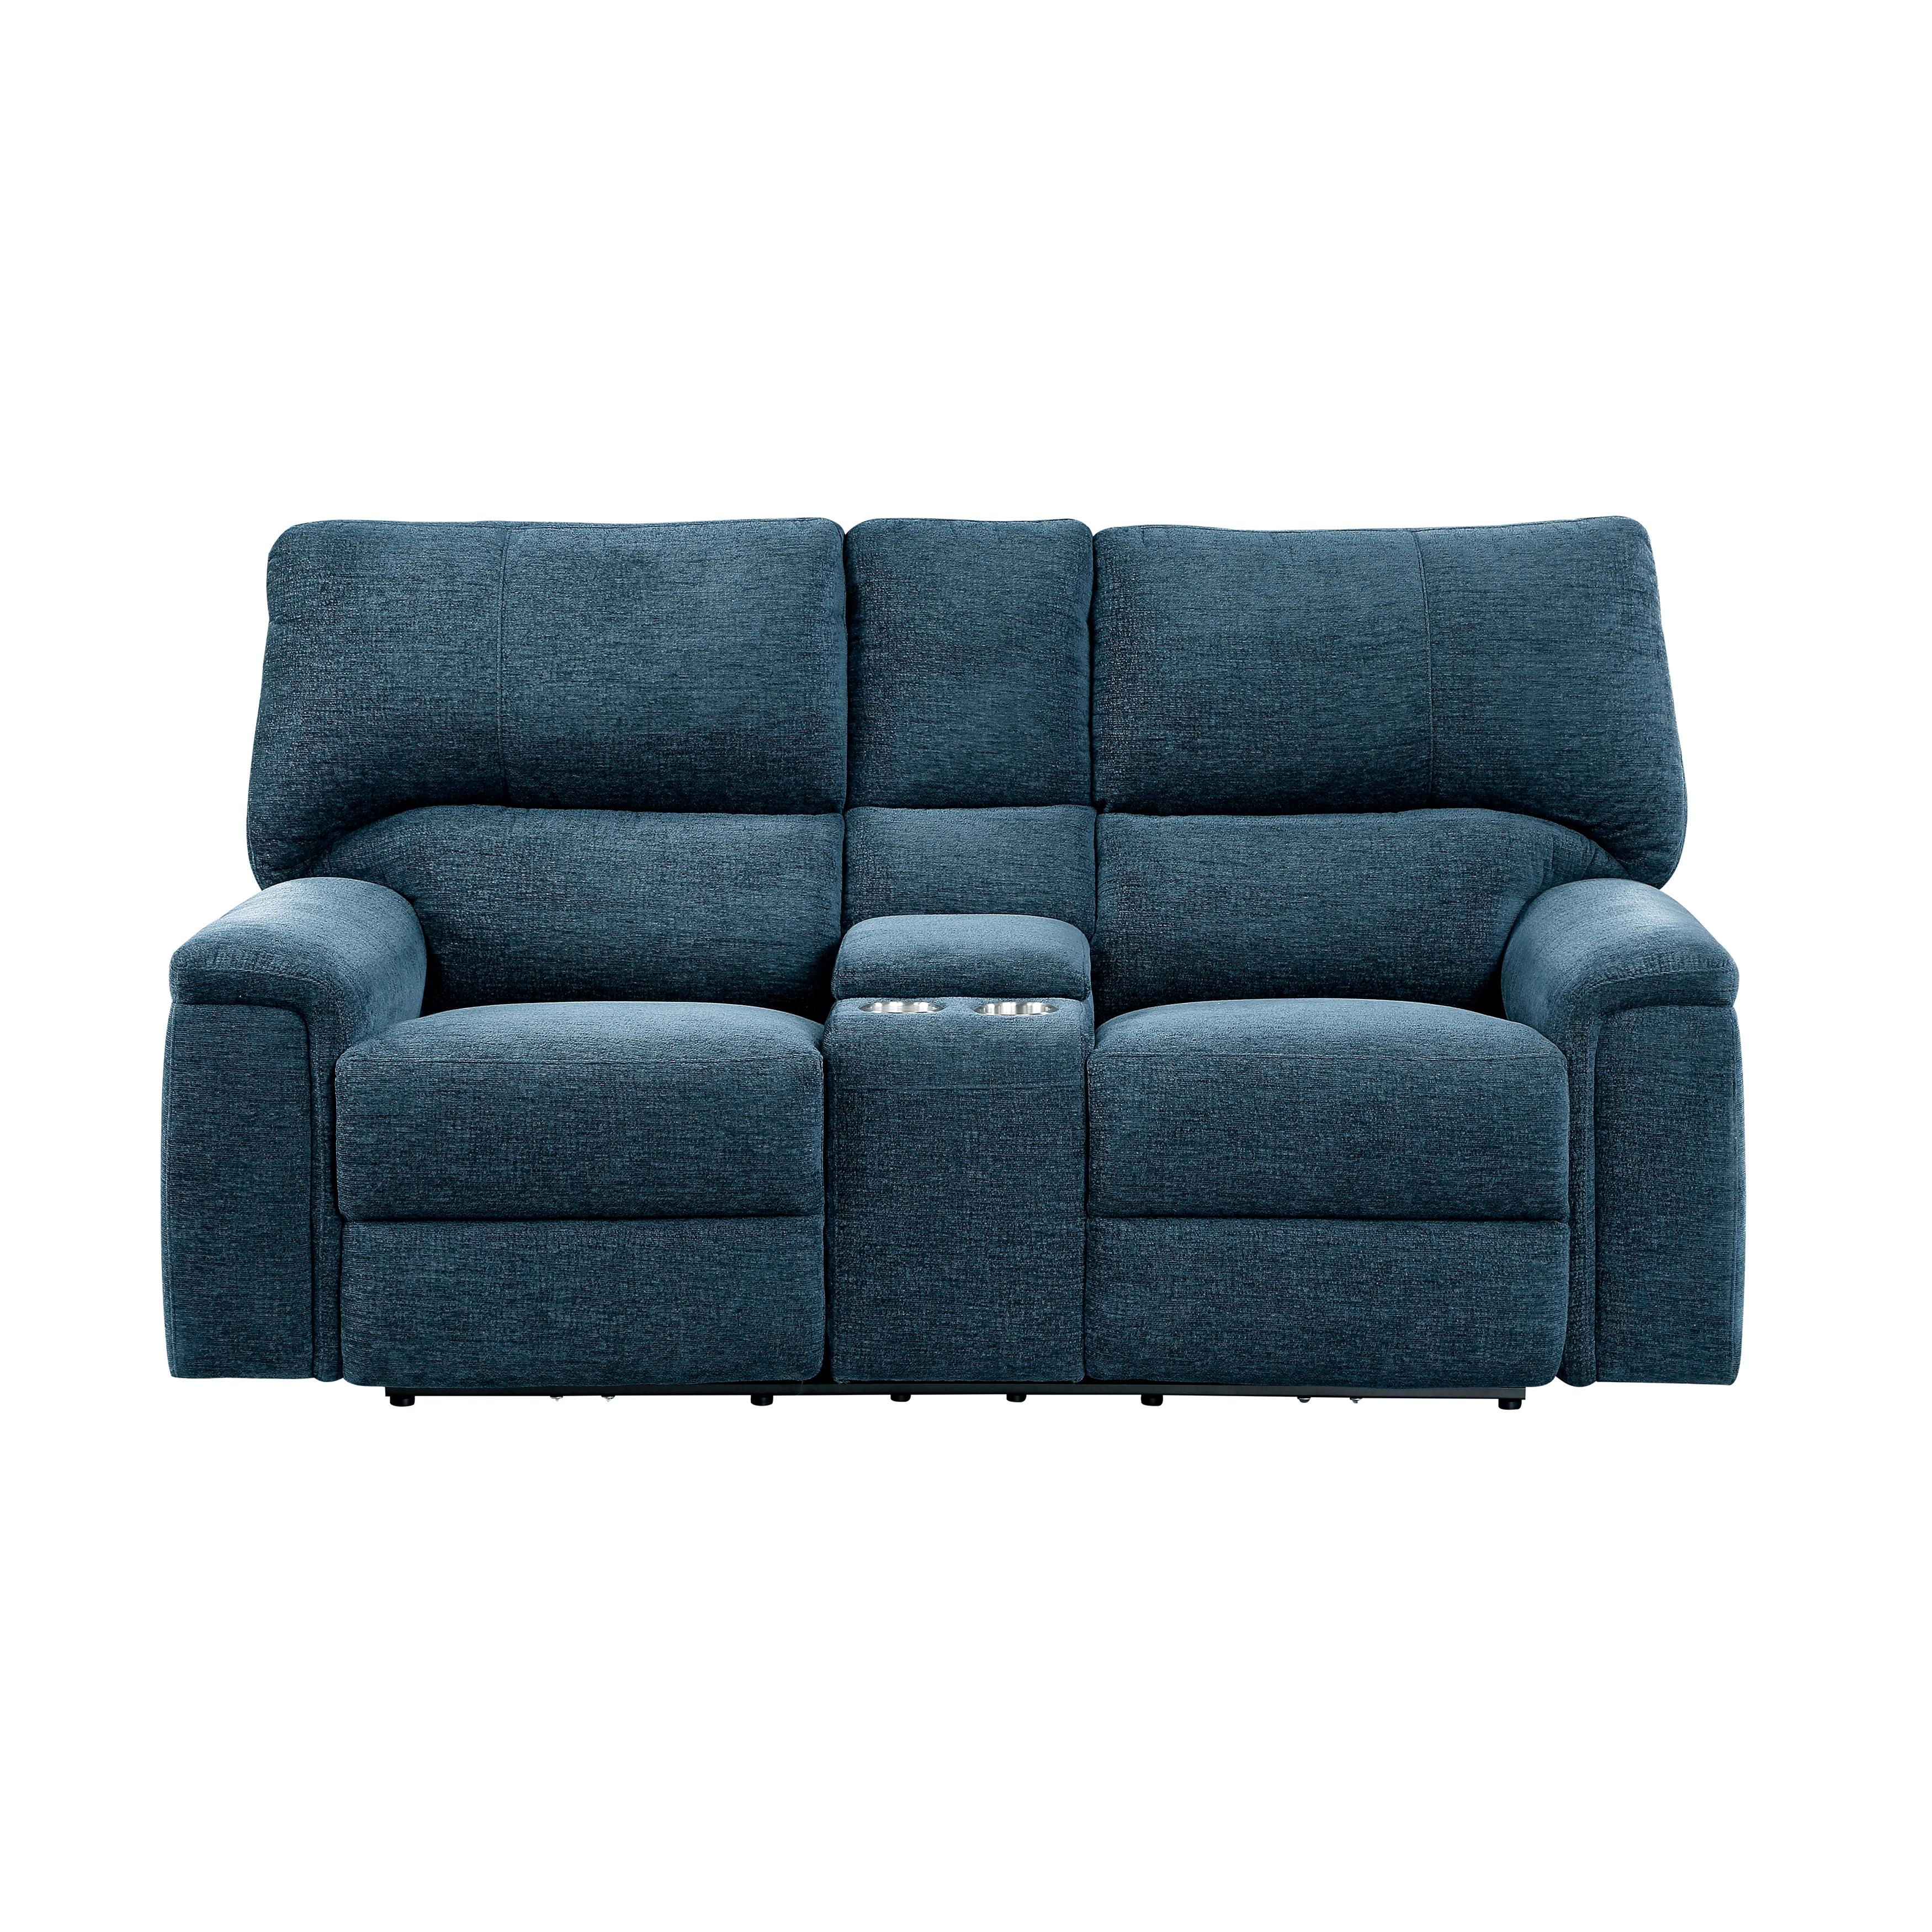 Transitional Power Reclining Loveseat 9413IN-2PWH Dickinson 9413IN-2PWH in Indigo Chenille